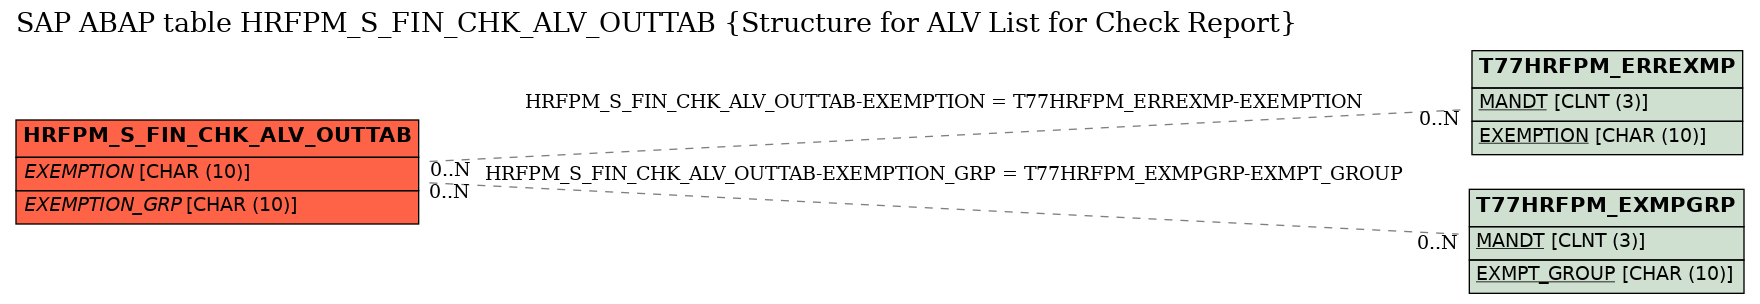 E-R Diagram for table HRFPM_S_FIN_CHK_ALV_OUTTAB (Structure for ALV List for Check Report)